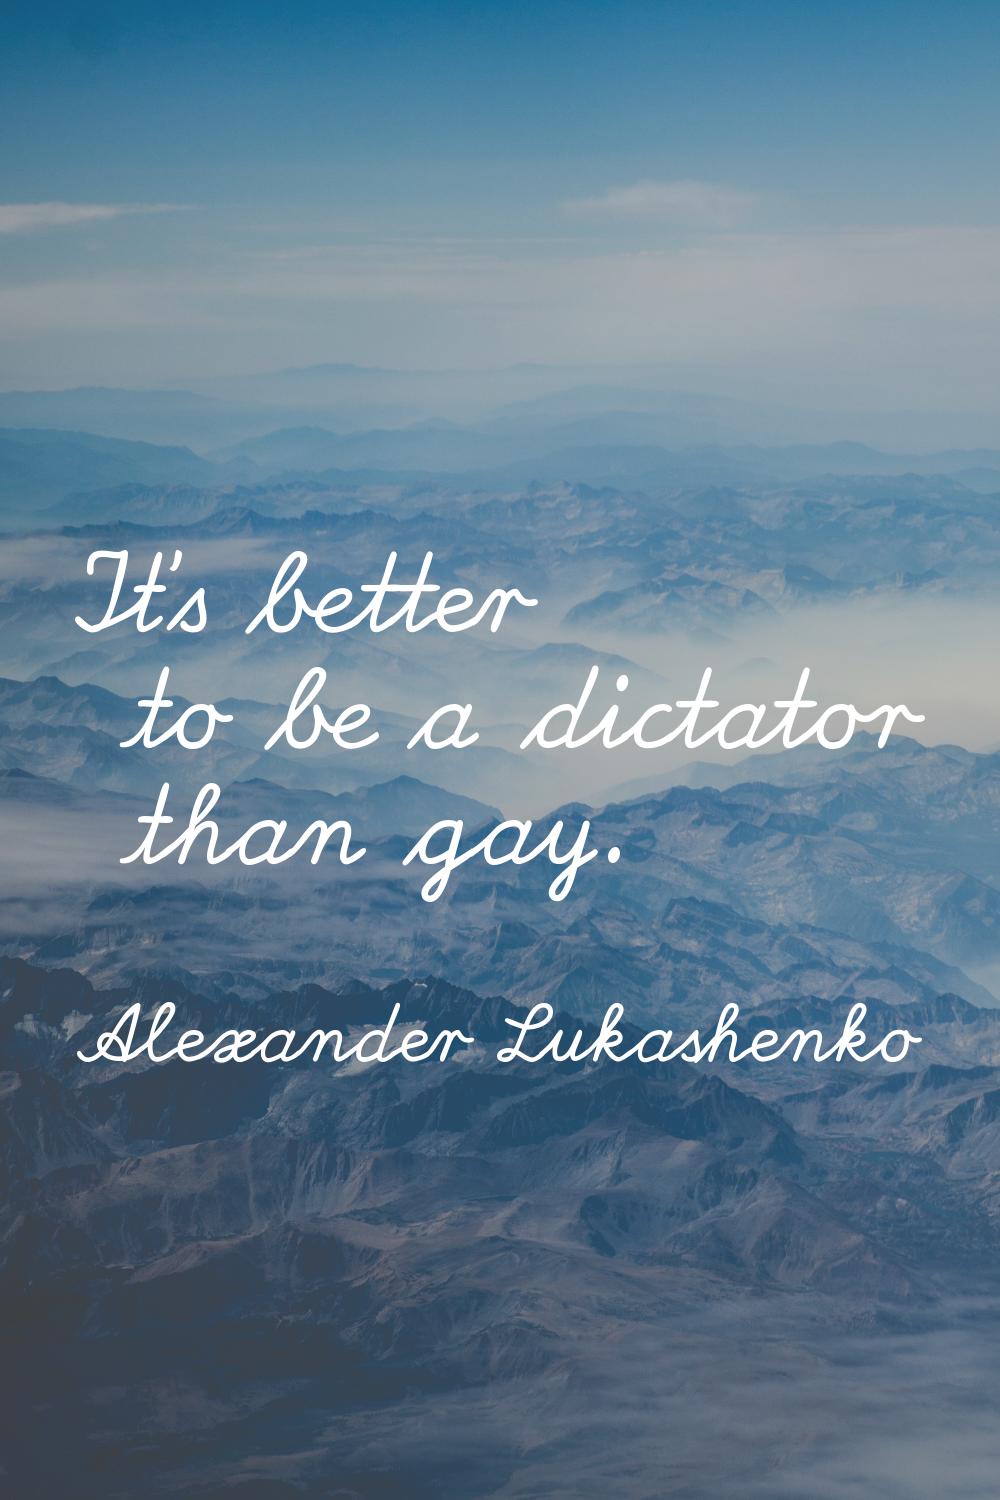 It's better to be a dictator than gay.